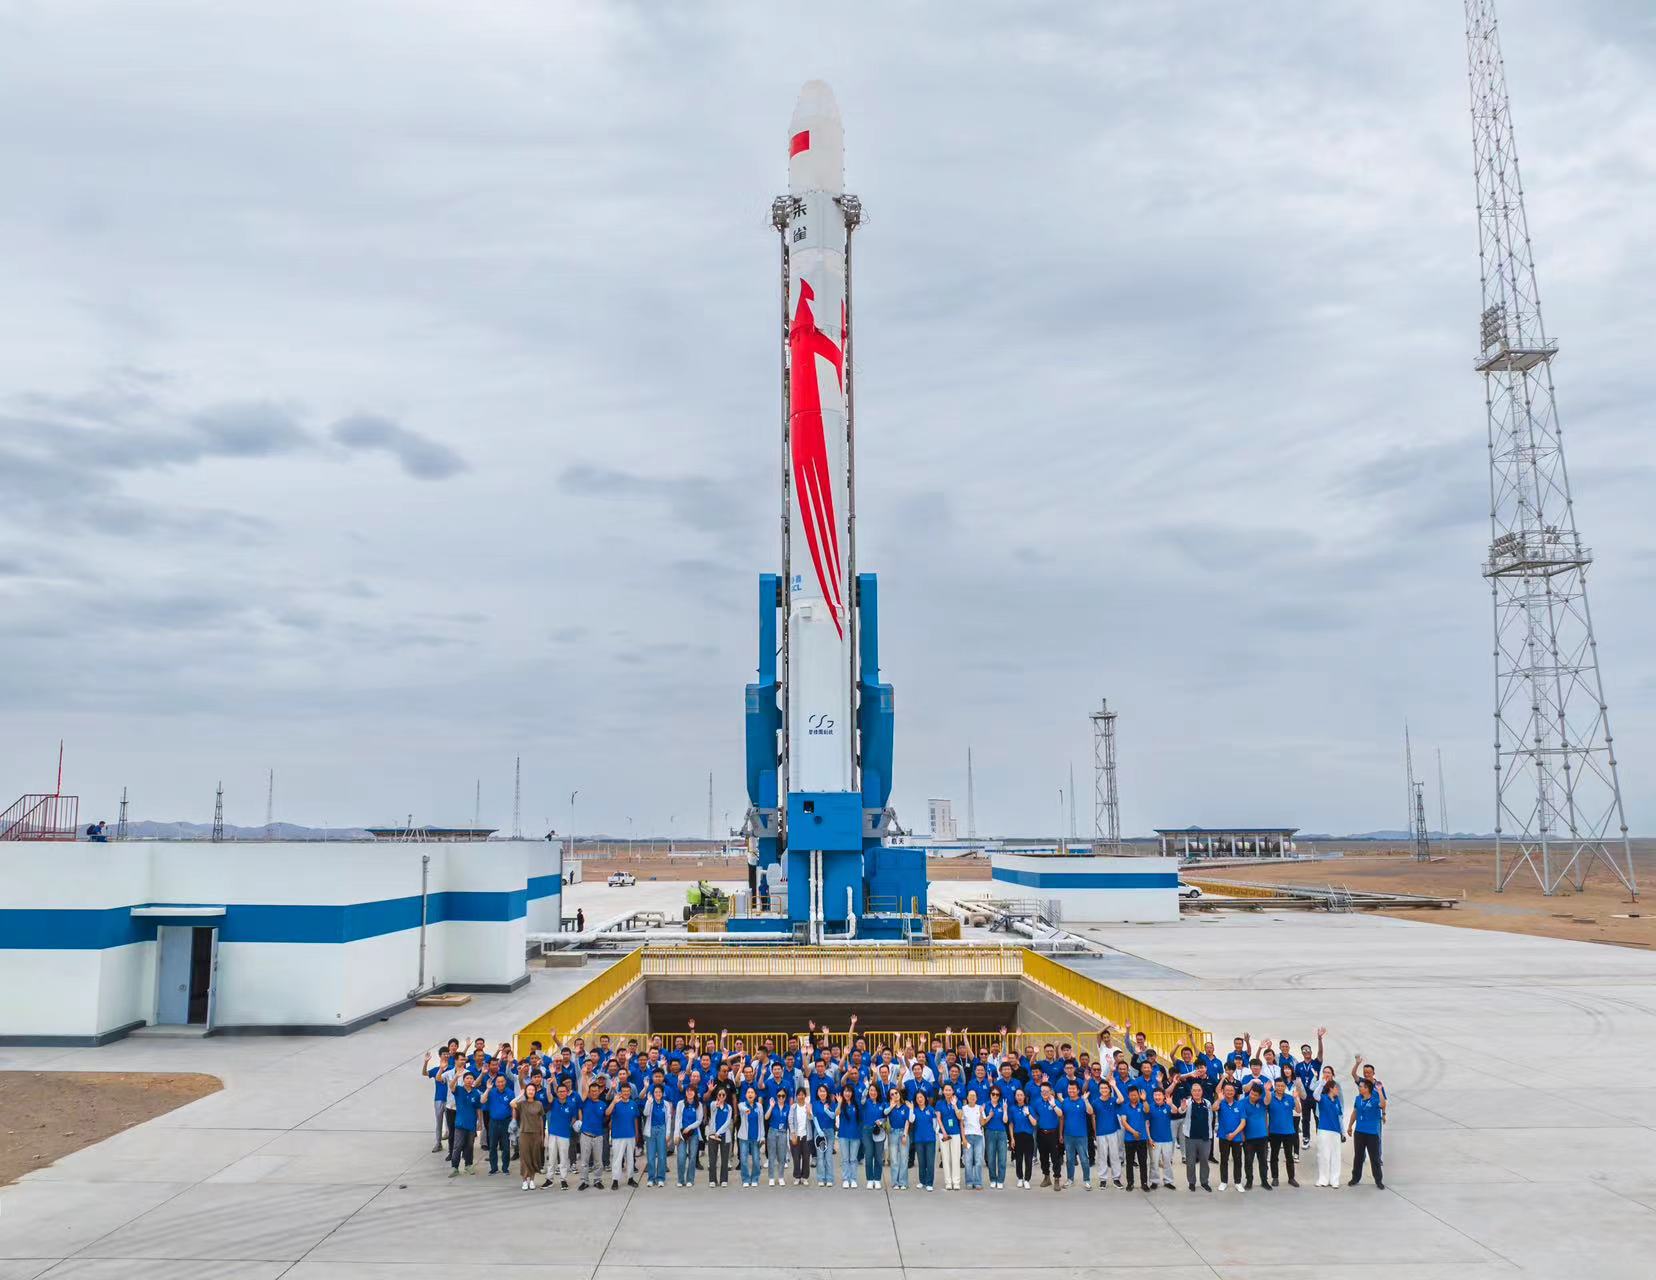 Staff members pose for a group photo before China launched Zhuque-2 Y-2 rocket from the Jiuquan Satellite Launch Center in northwest China's Gobi Desert, July 12, 2023. /LandSpace